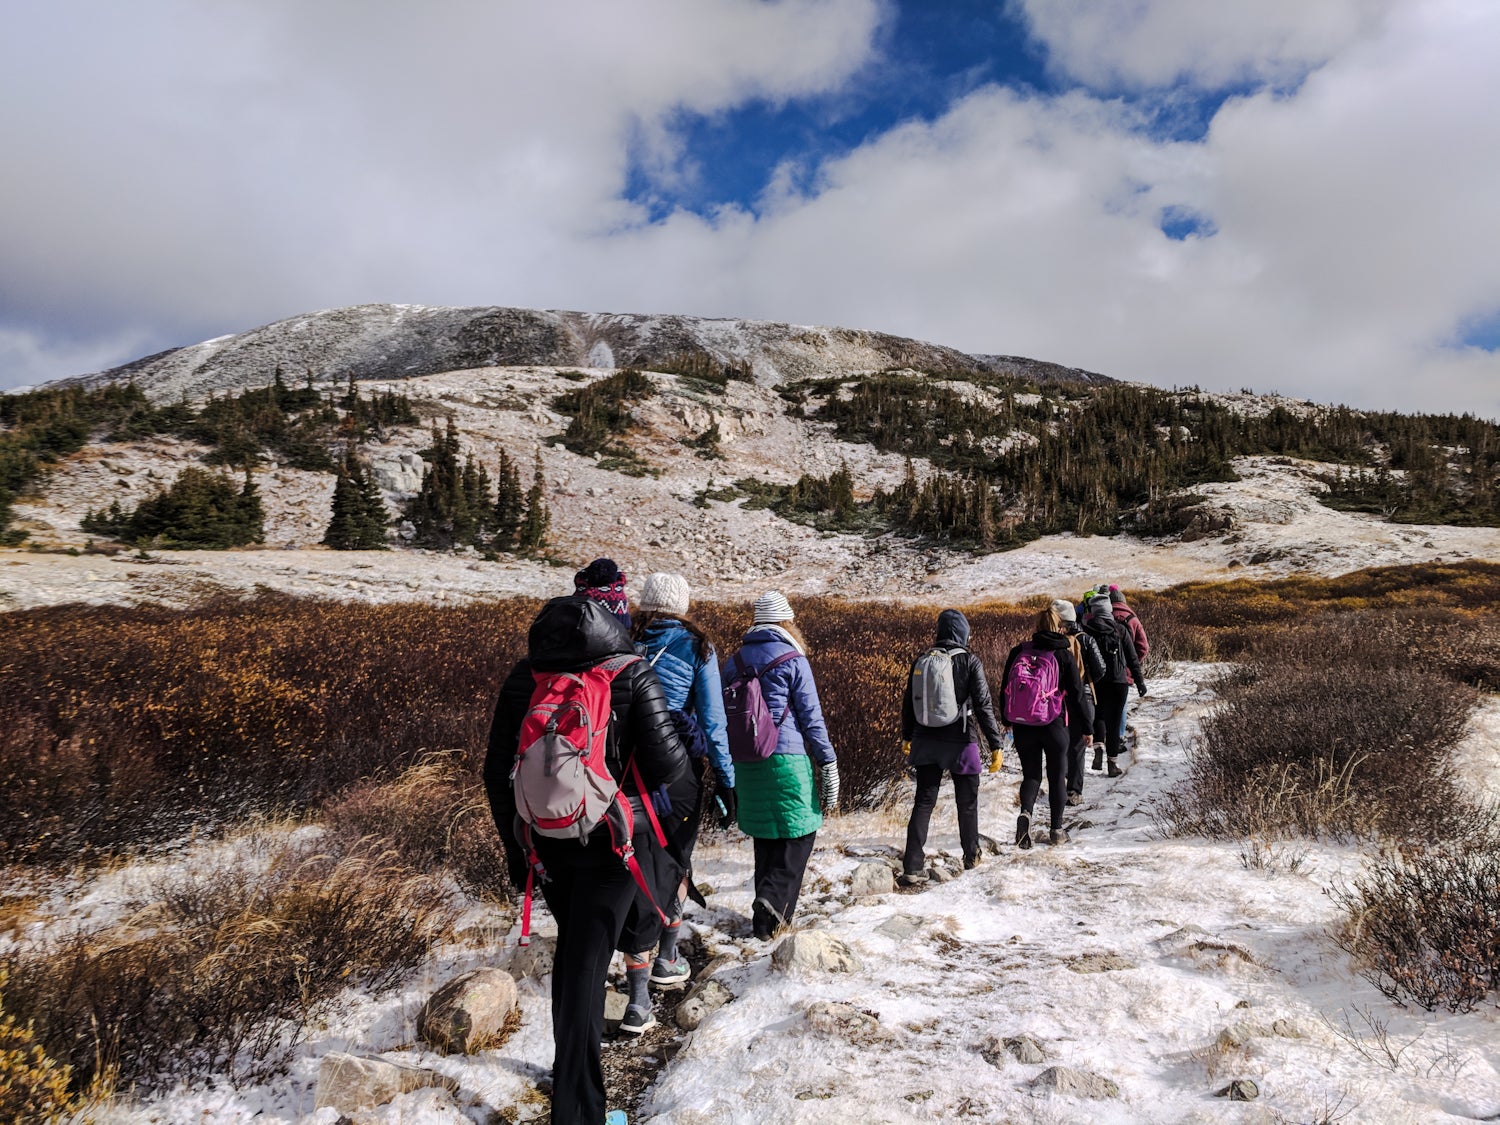 Women hiking while bundled in puffer jackets and beanies with day packs, headed up a trail through snow in Wyoming.